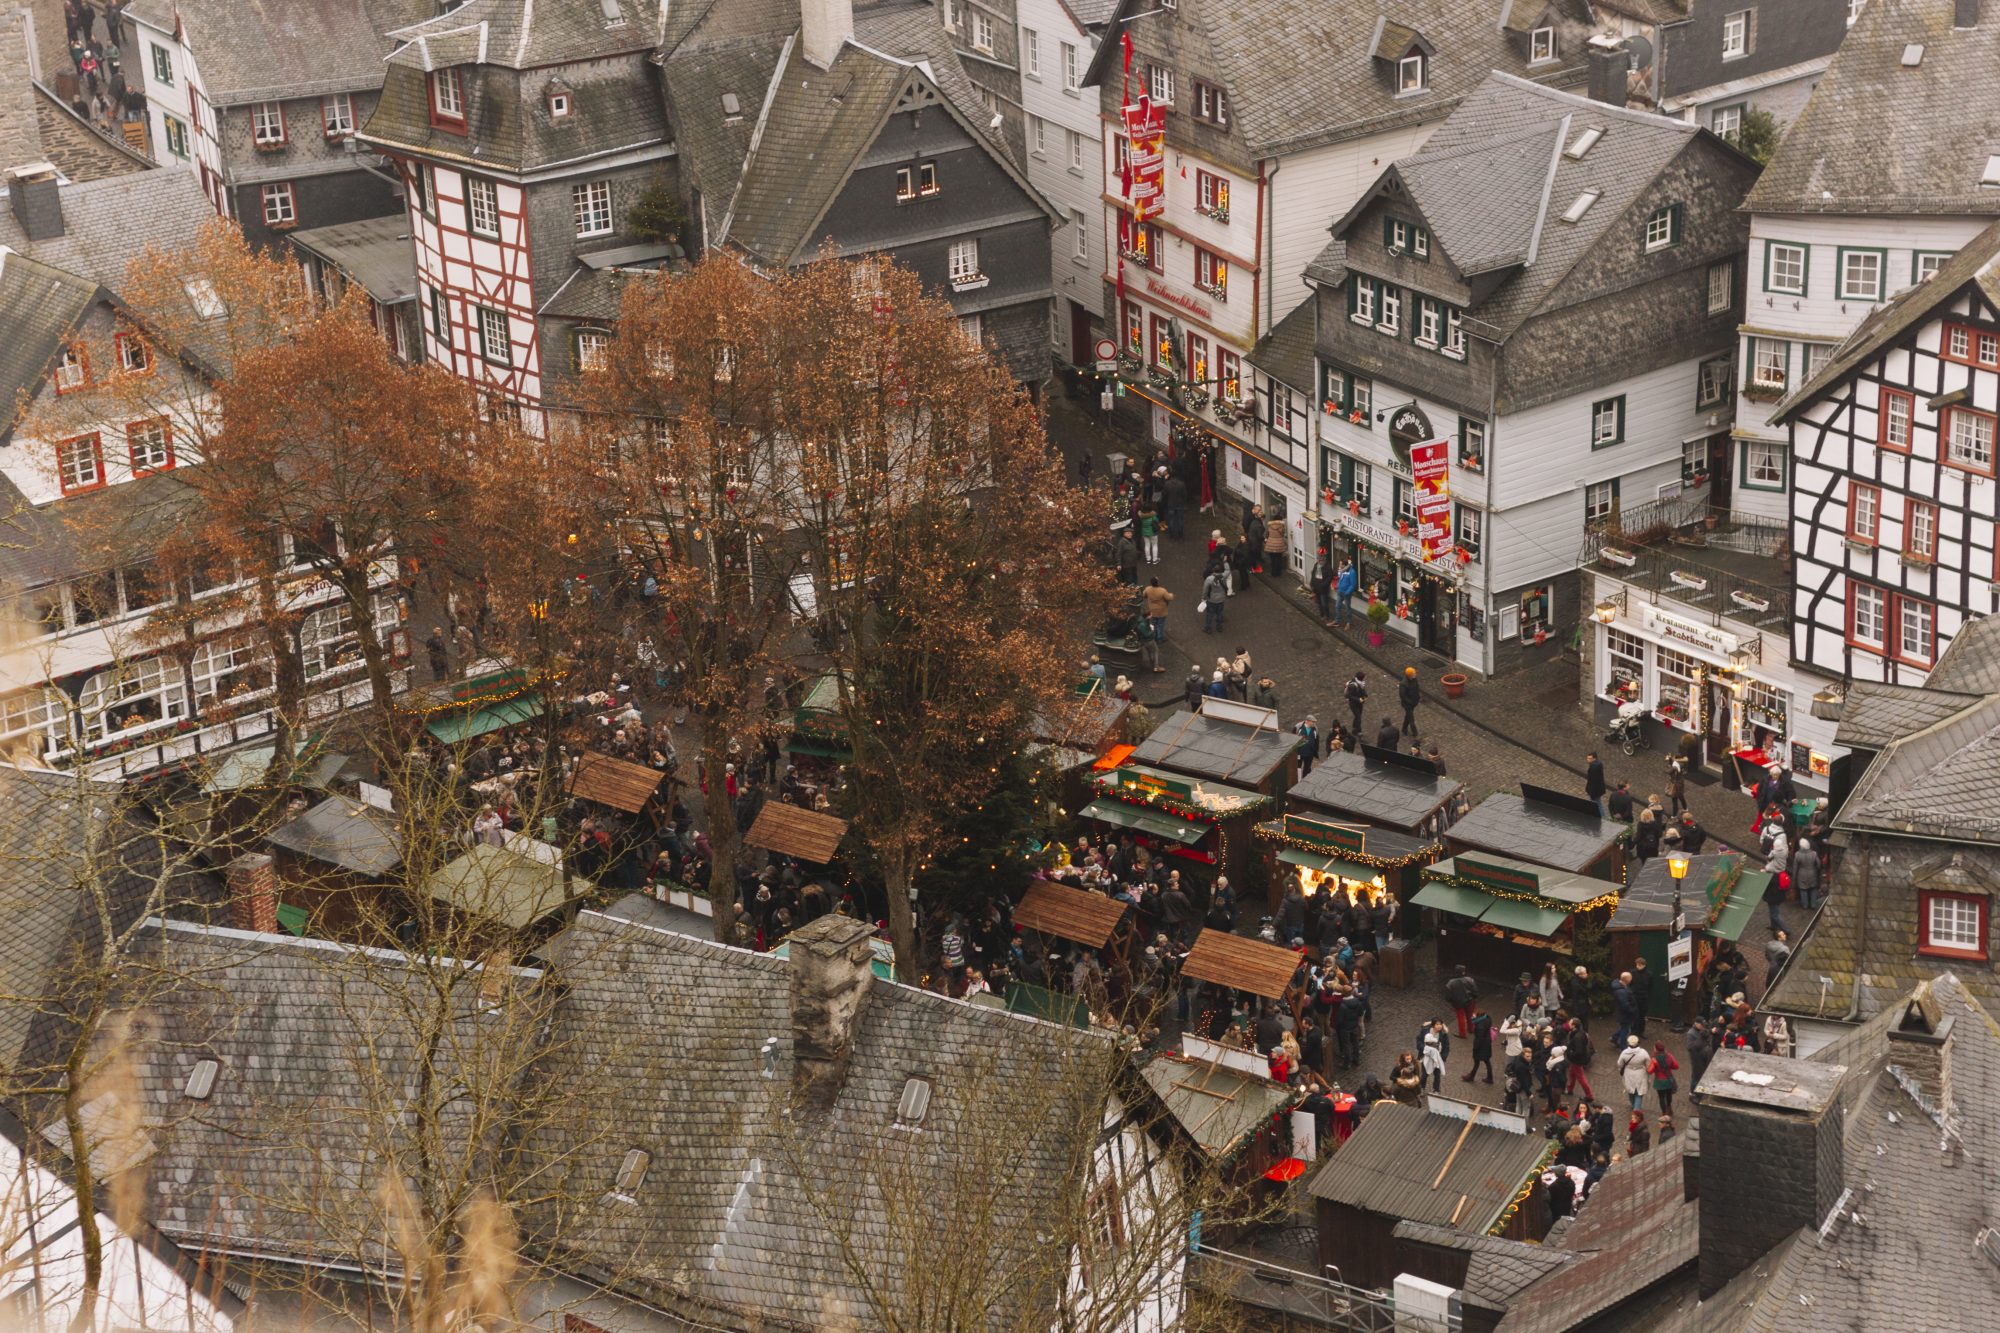 The Christmas market from up high